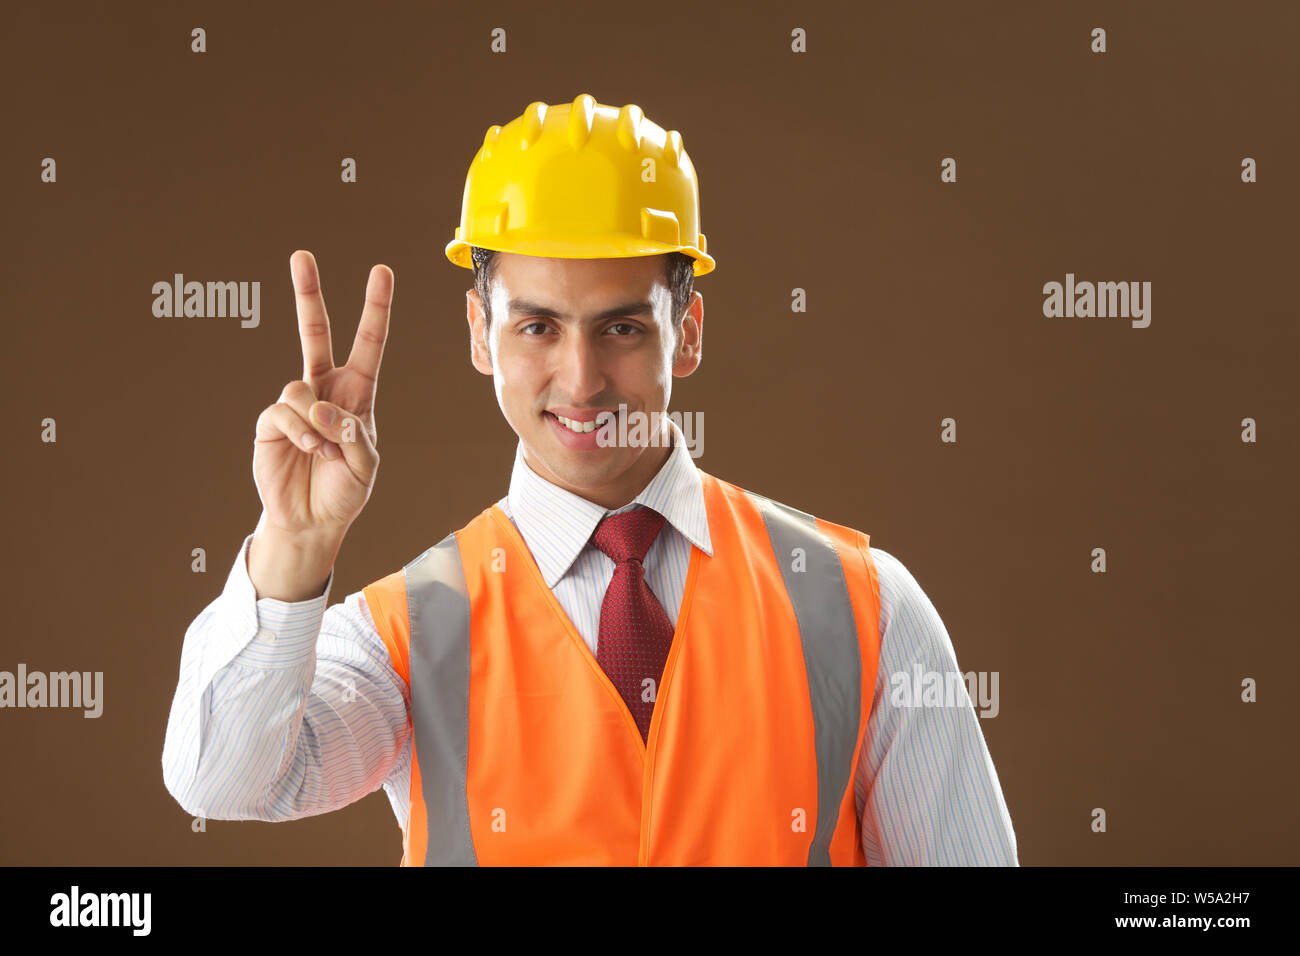 Portrait of an architect showing v sign Stock Photo